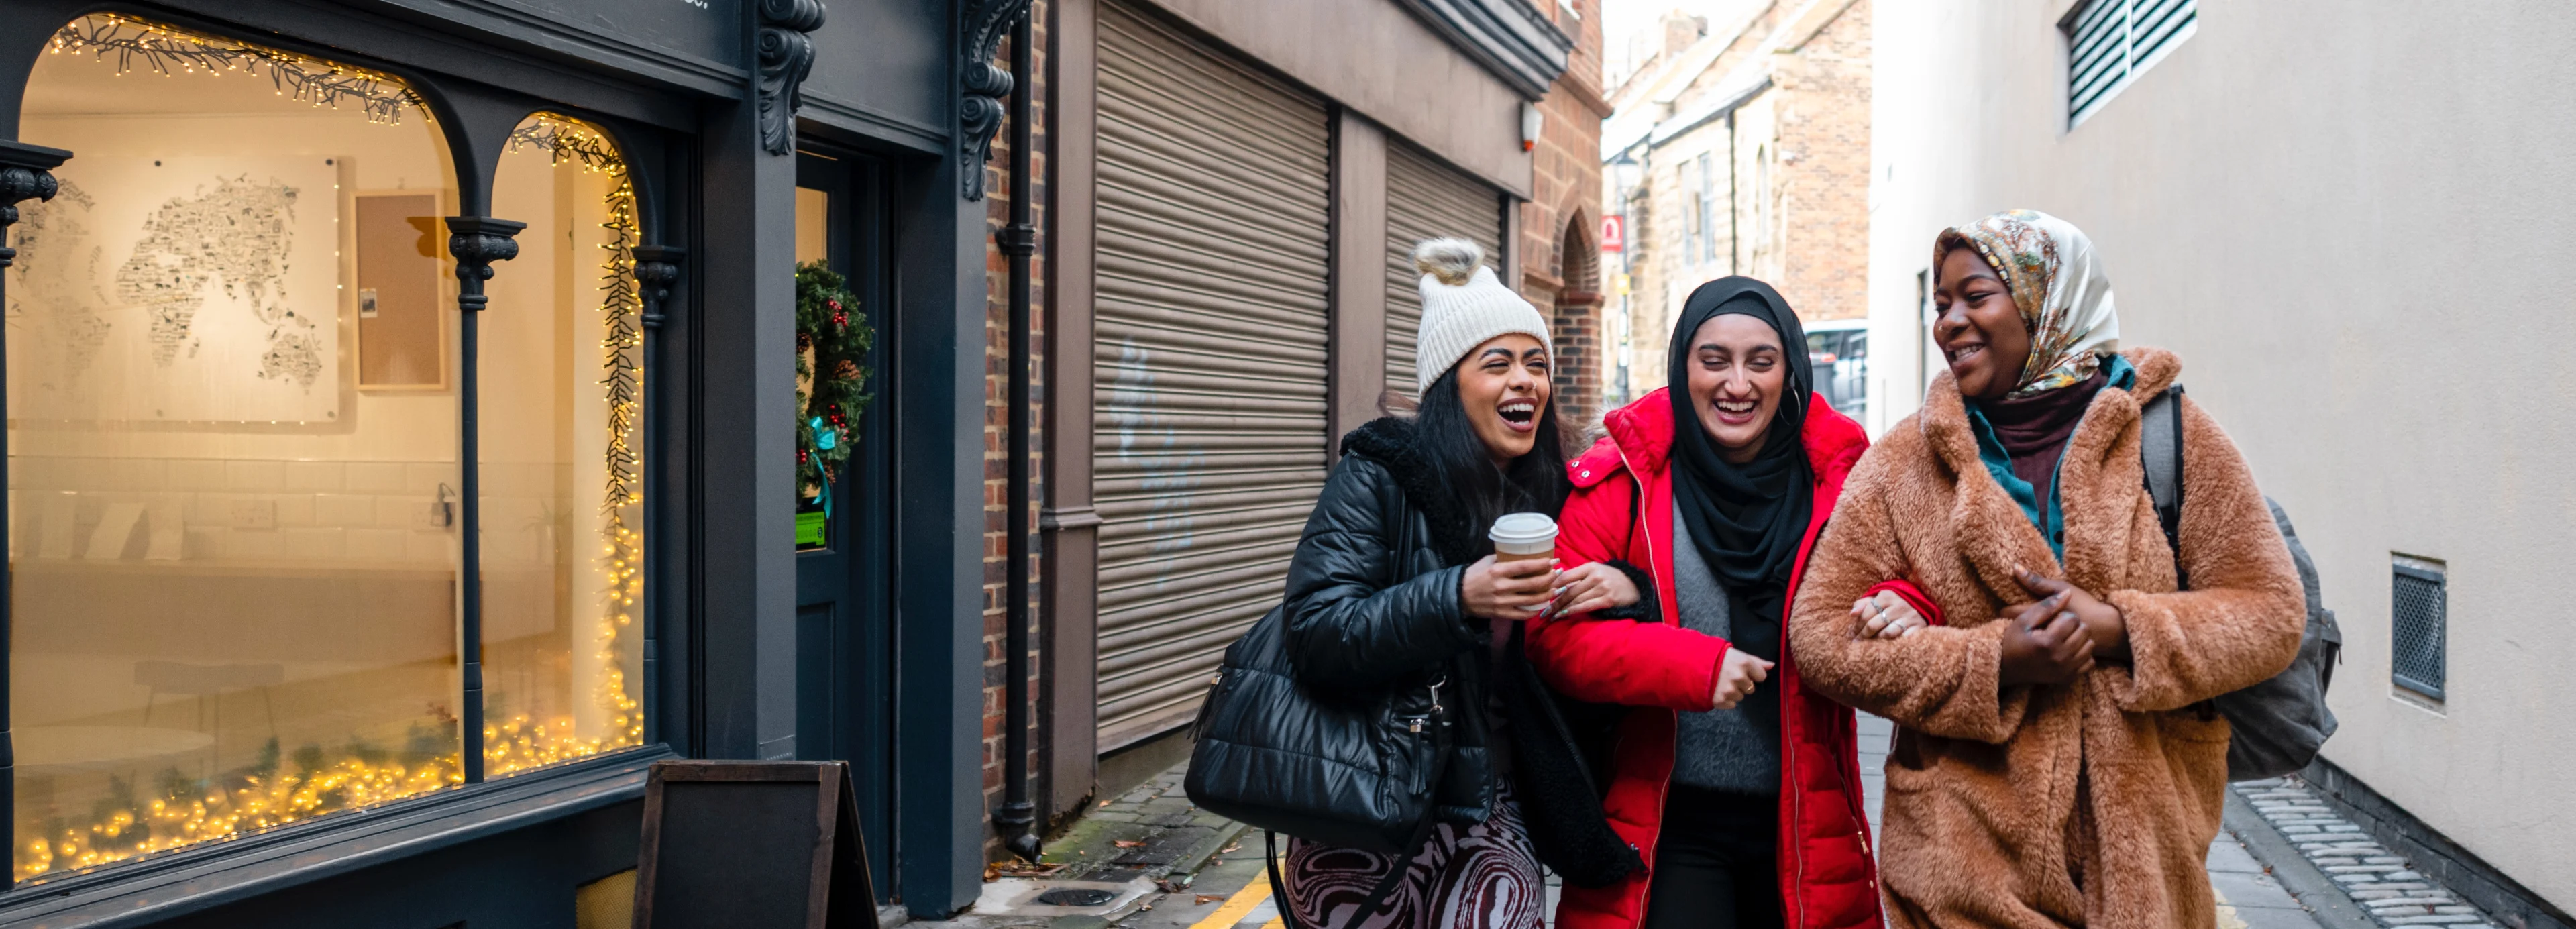 Three female friends, 1 is wearing a bobble hat and 2 have headscarves, are smiling and walking arm in arm down a narrow street